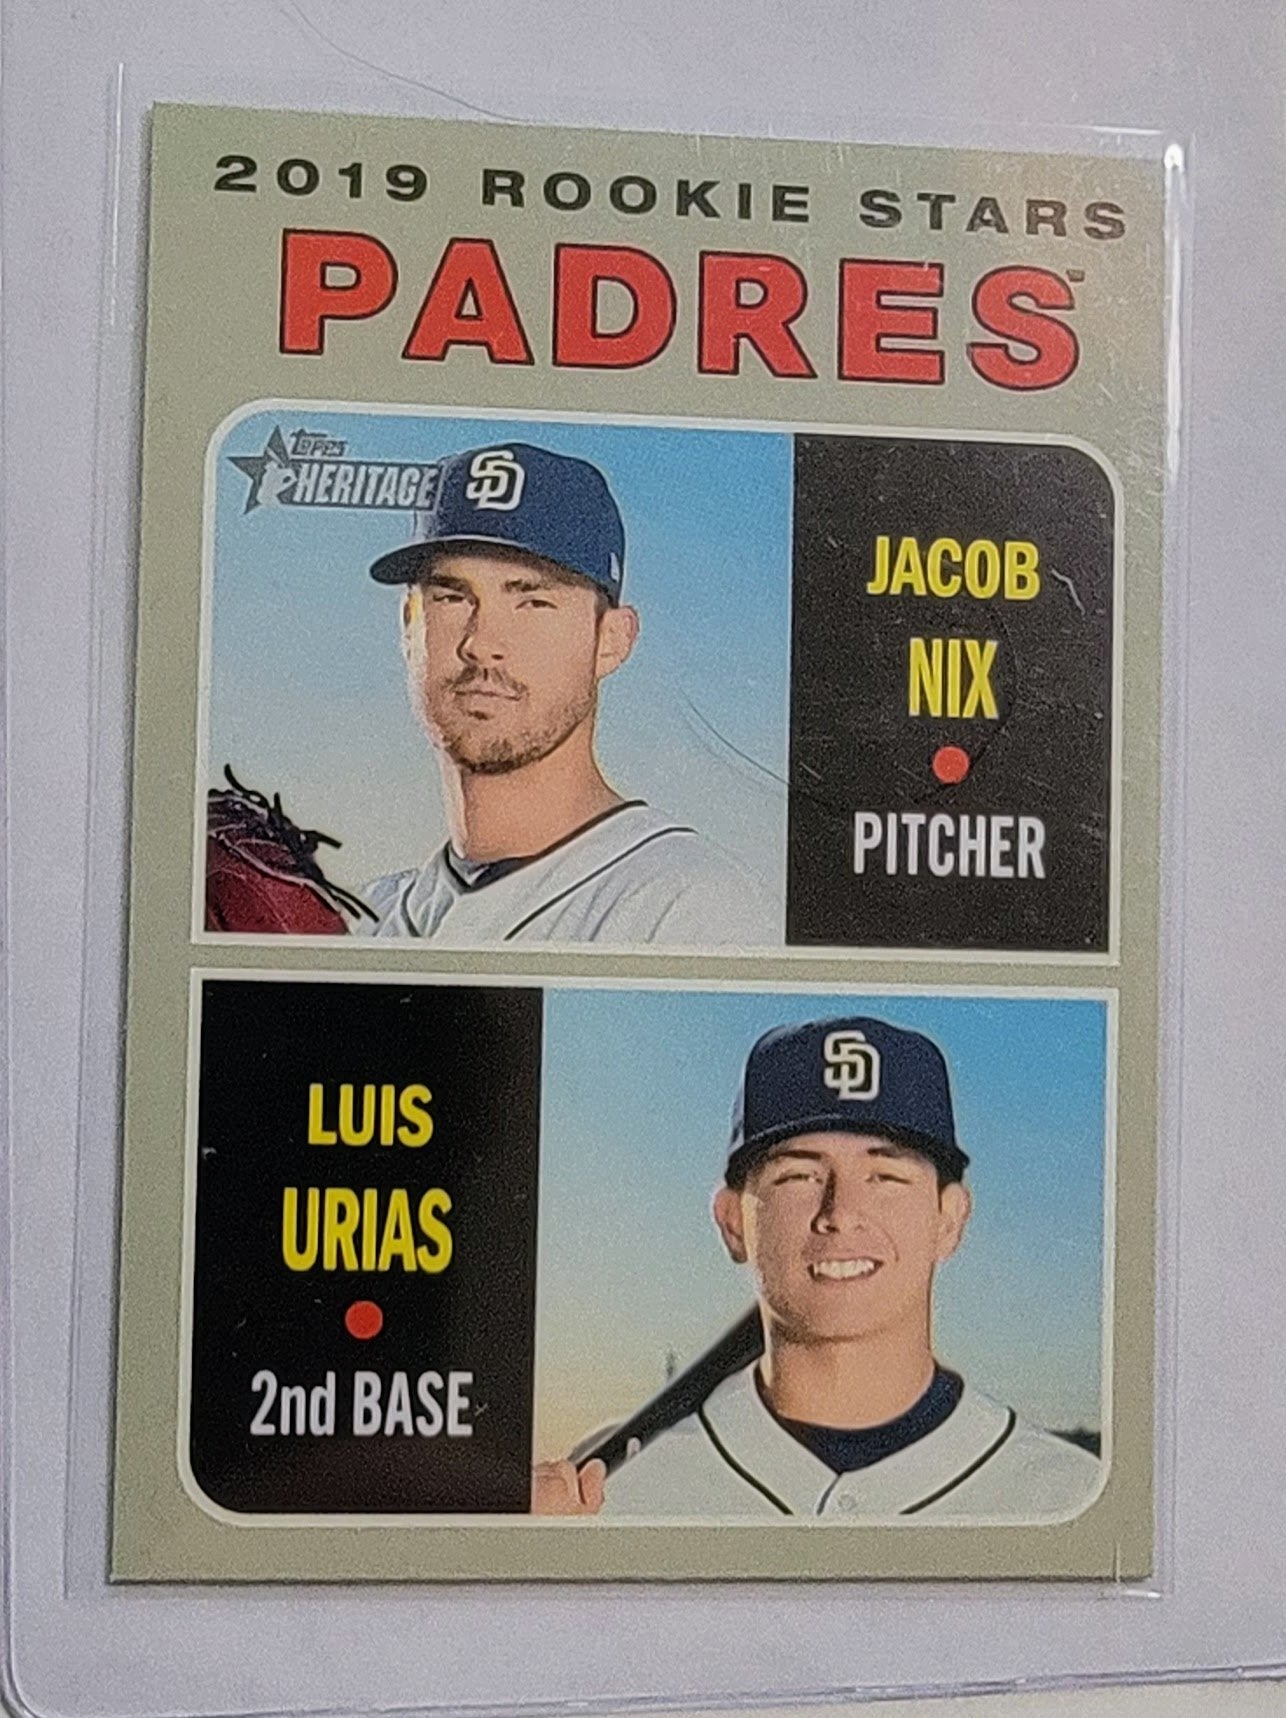 2019 Topps Heritage Padres Jacob Nix & Luis Urias Rookie Stars Baseball Card TPTV simple Xclusive Collectibles   